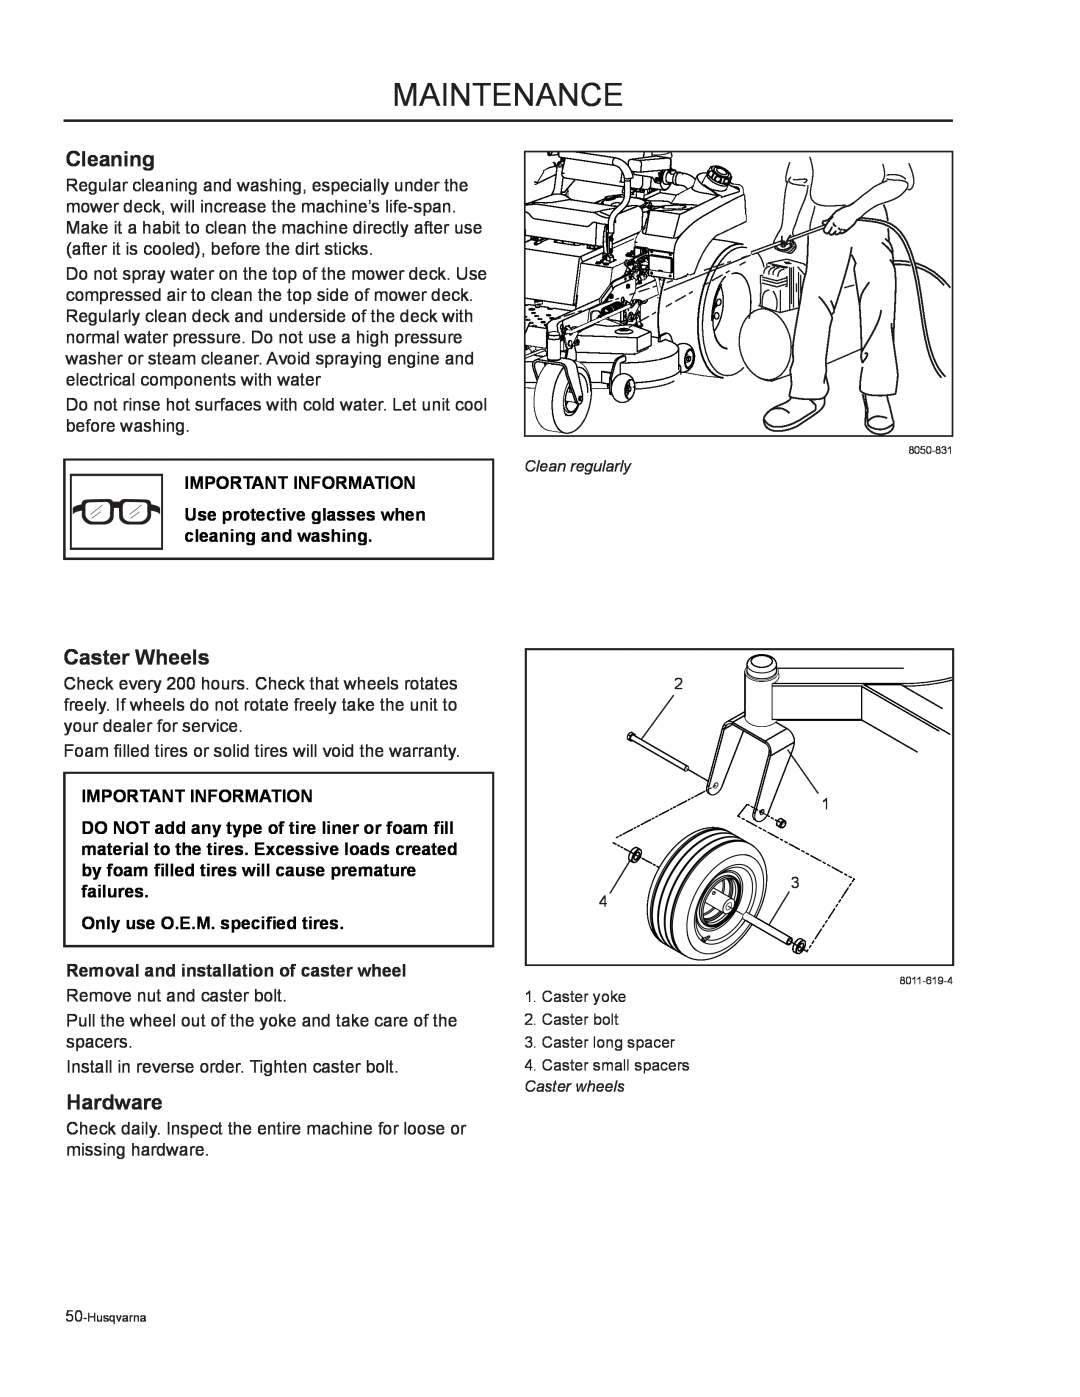 Husqvarna RZ5422 Cleaning, Caster Wheels, Hardware, Maintenance, Important Information, Only use O.E.M. specified tires 